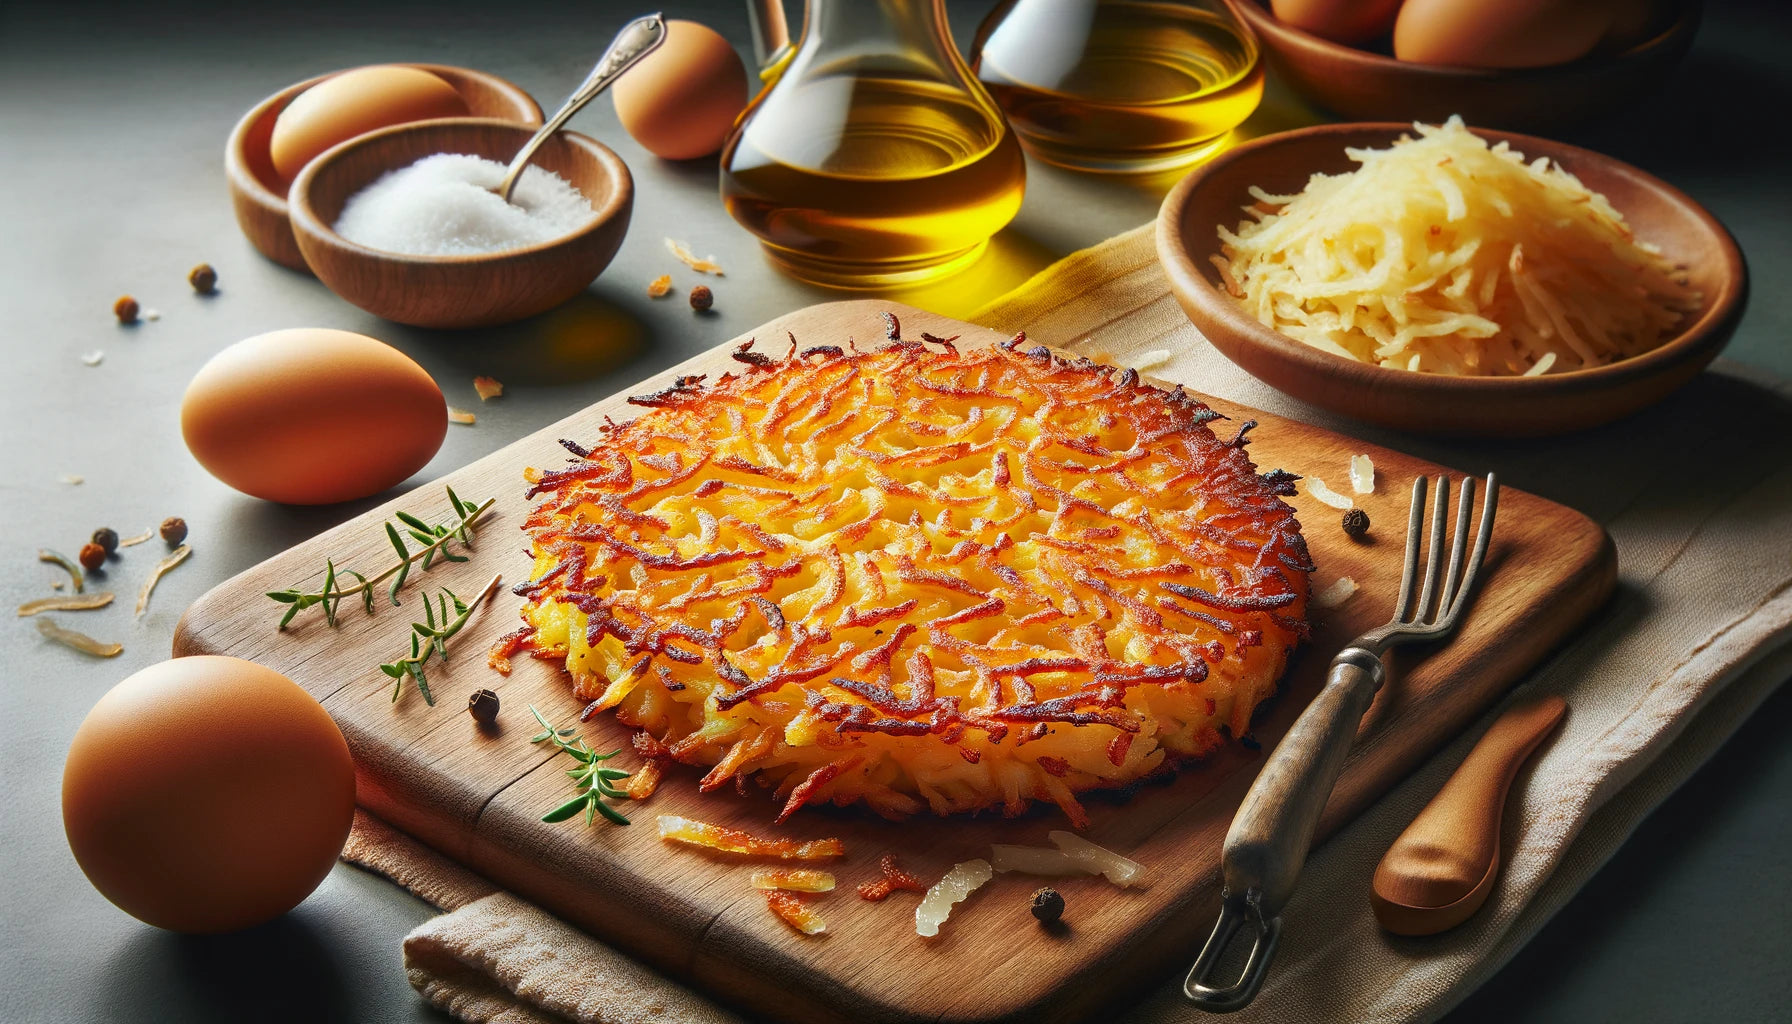 view of crispy, golden homemade hash browns, showcasing their perfect crust and golden color